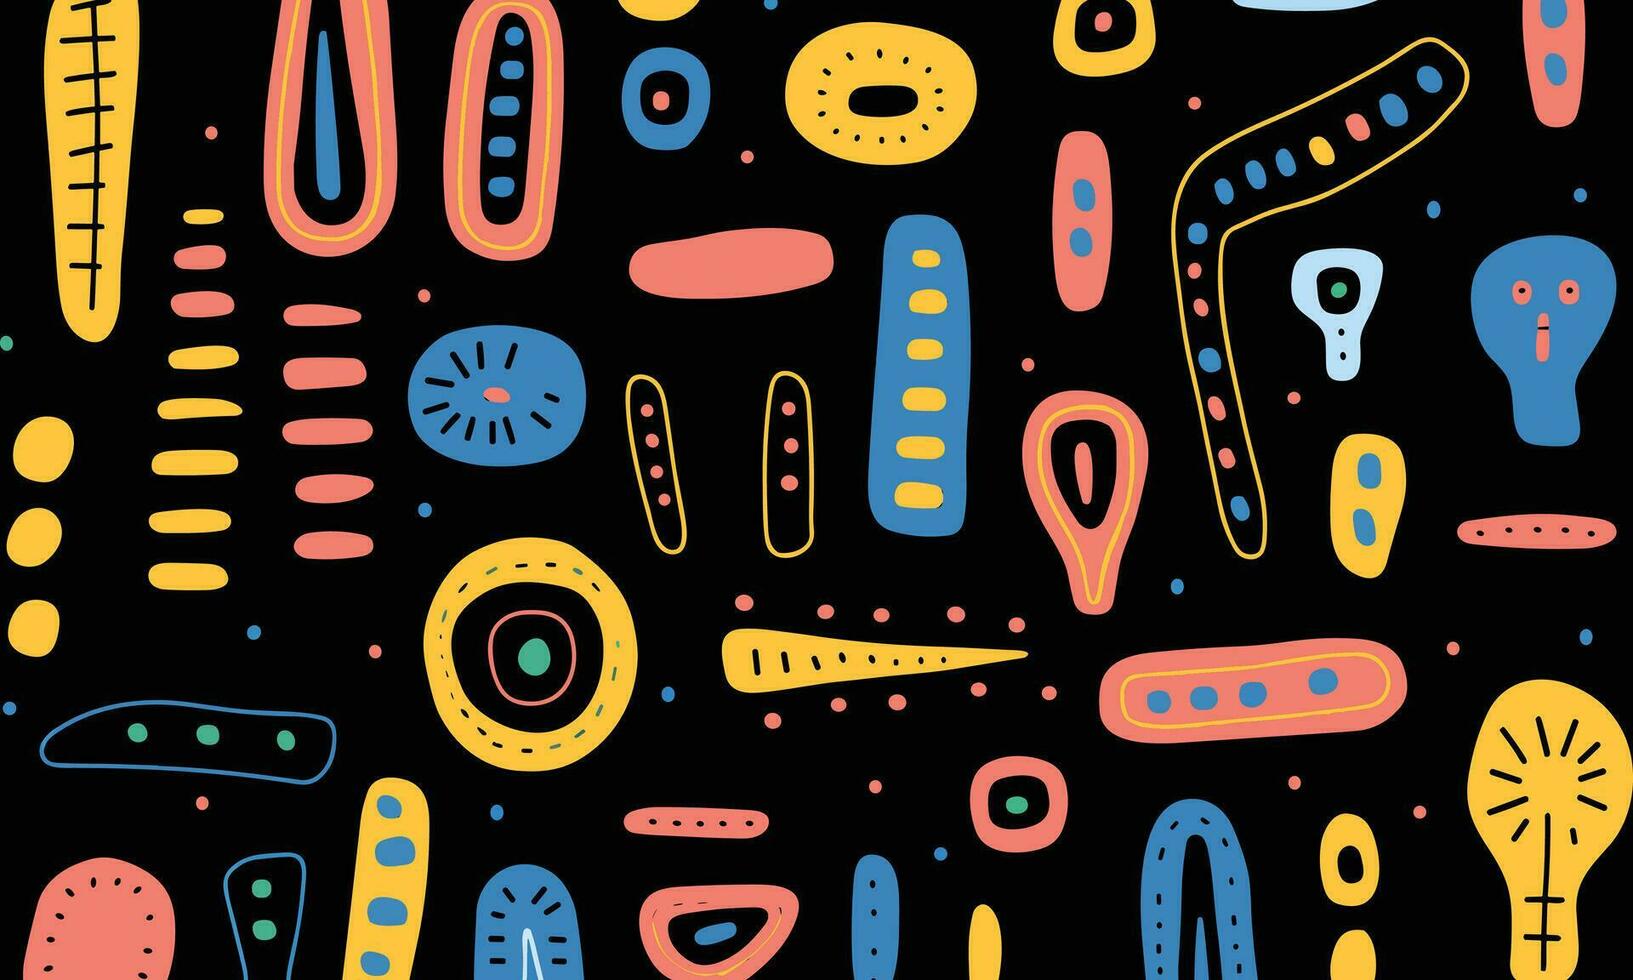 colorful shapes on black background, in the style of minimalist brush work, stripes and shapes, whimsical doodles, rectangular fields, contrasting colors, cute and colorful, african influence vector